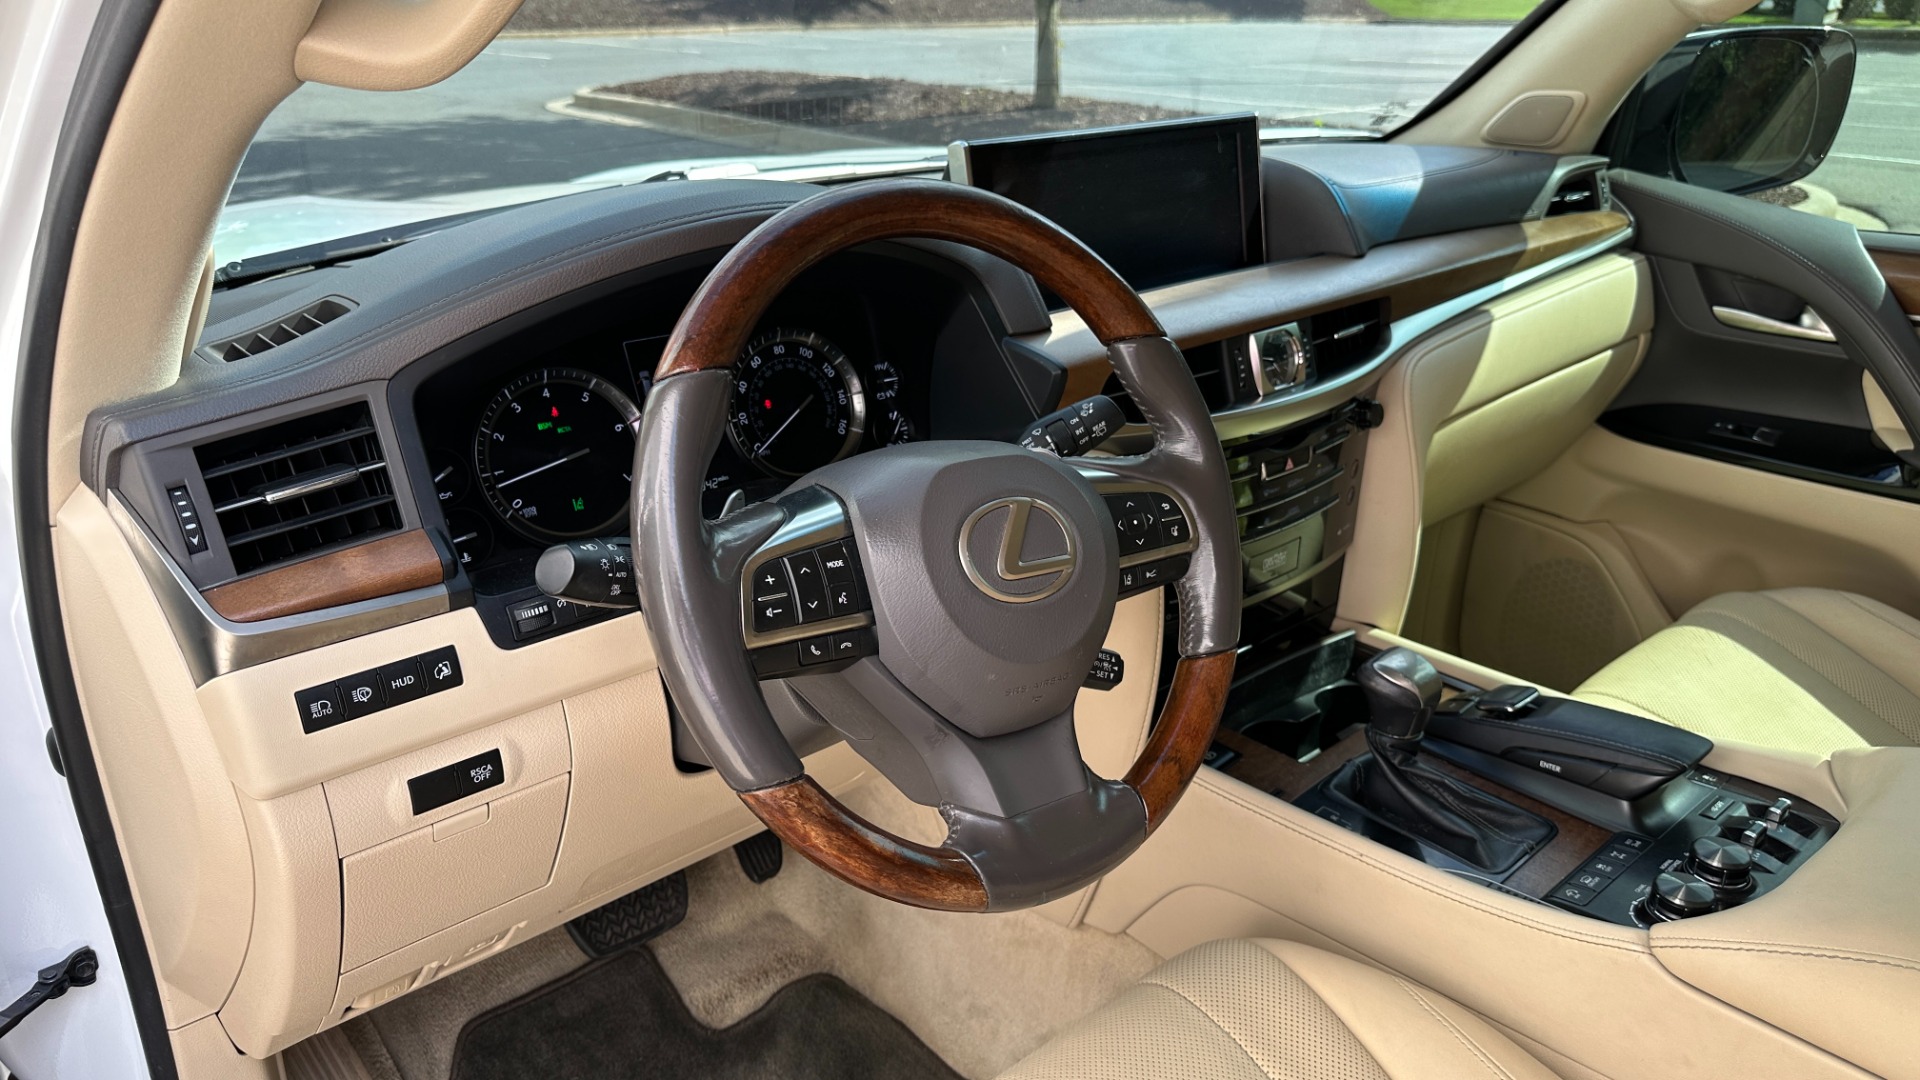 Used 2017 Lexus LX LX 570 LUXURY / MARK LEVINSON / REAR DVD SCREENS / 3 ROW / 4WD for sale $46,995 at Formula Imports in Charlotte NC 28227 11